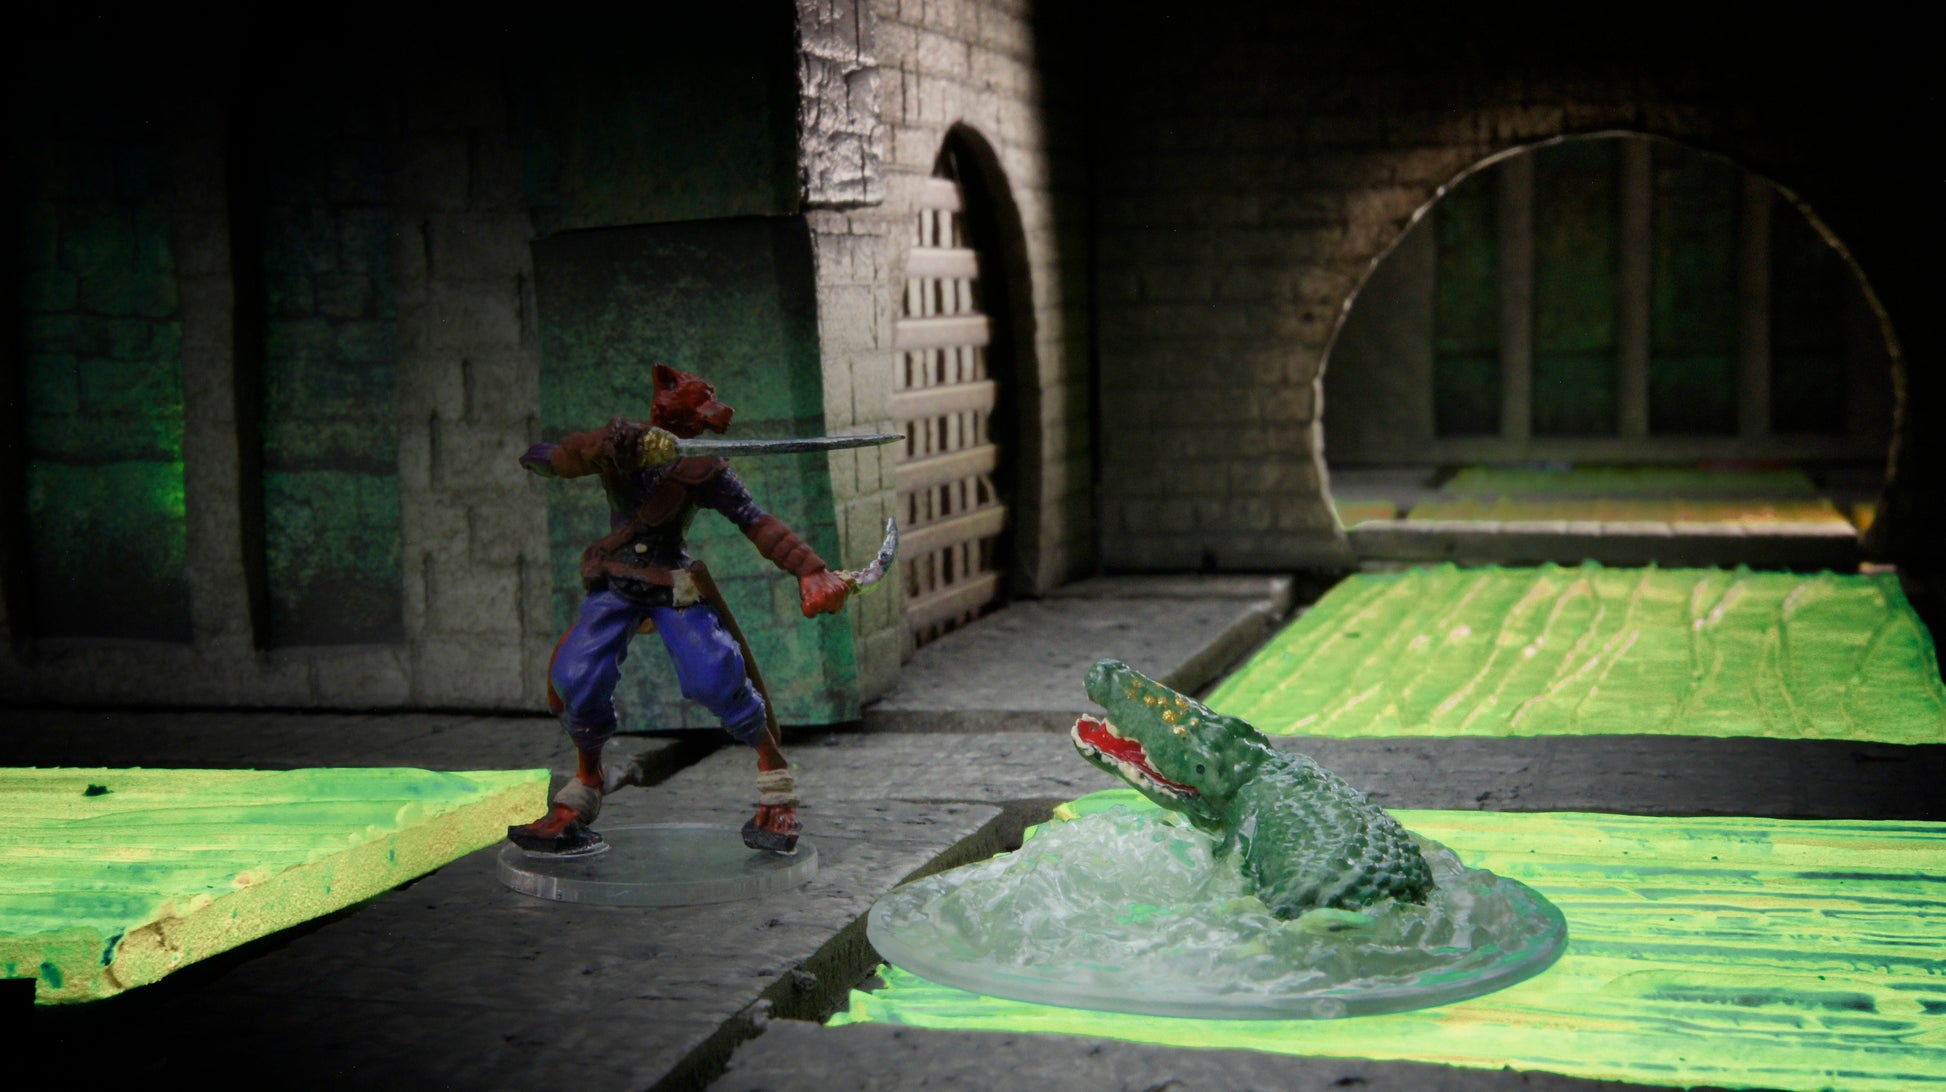 Glitter gators love to lure D&D adventurers into the sewage for a roll